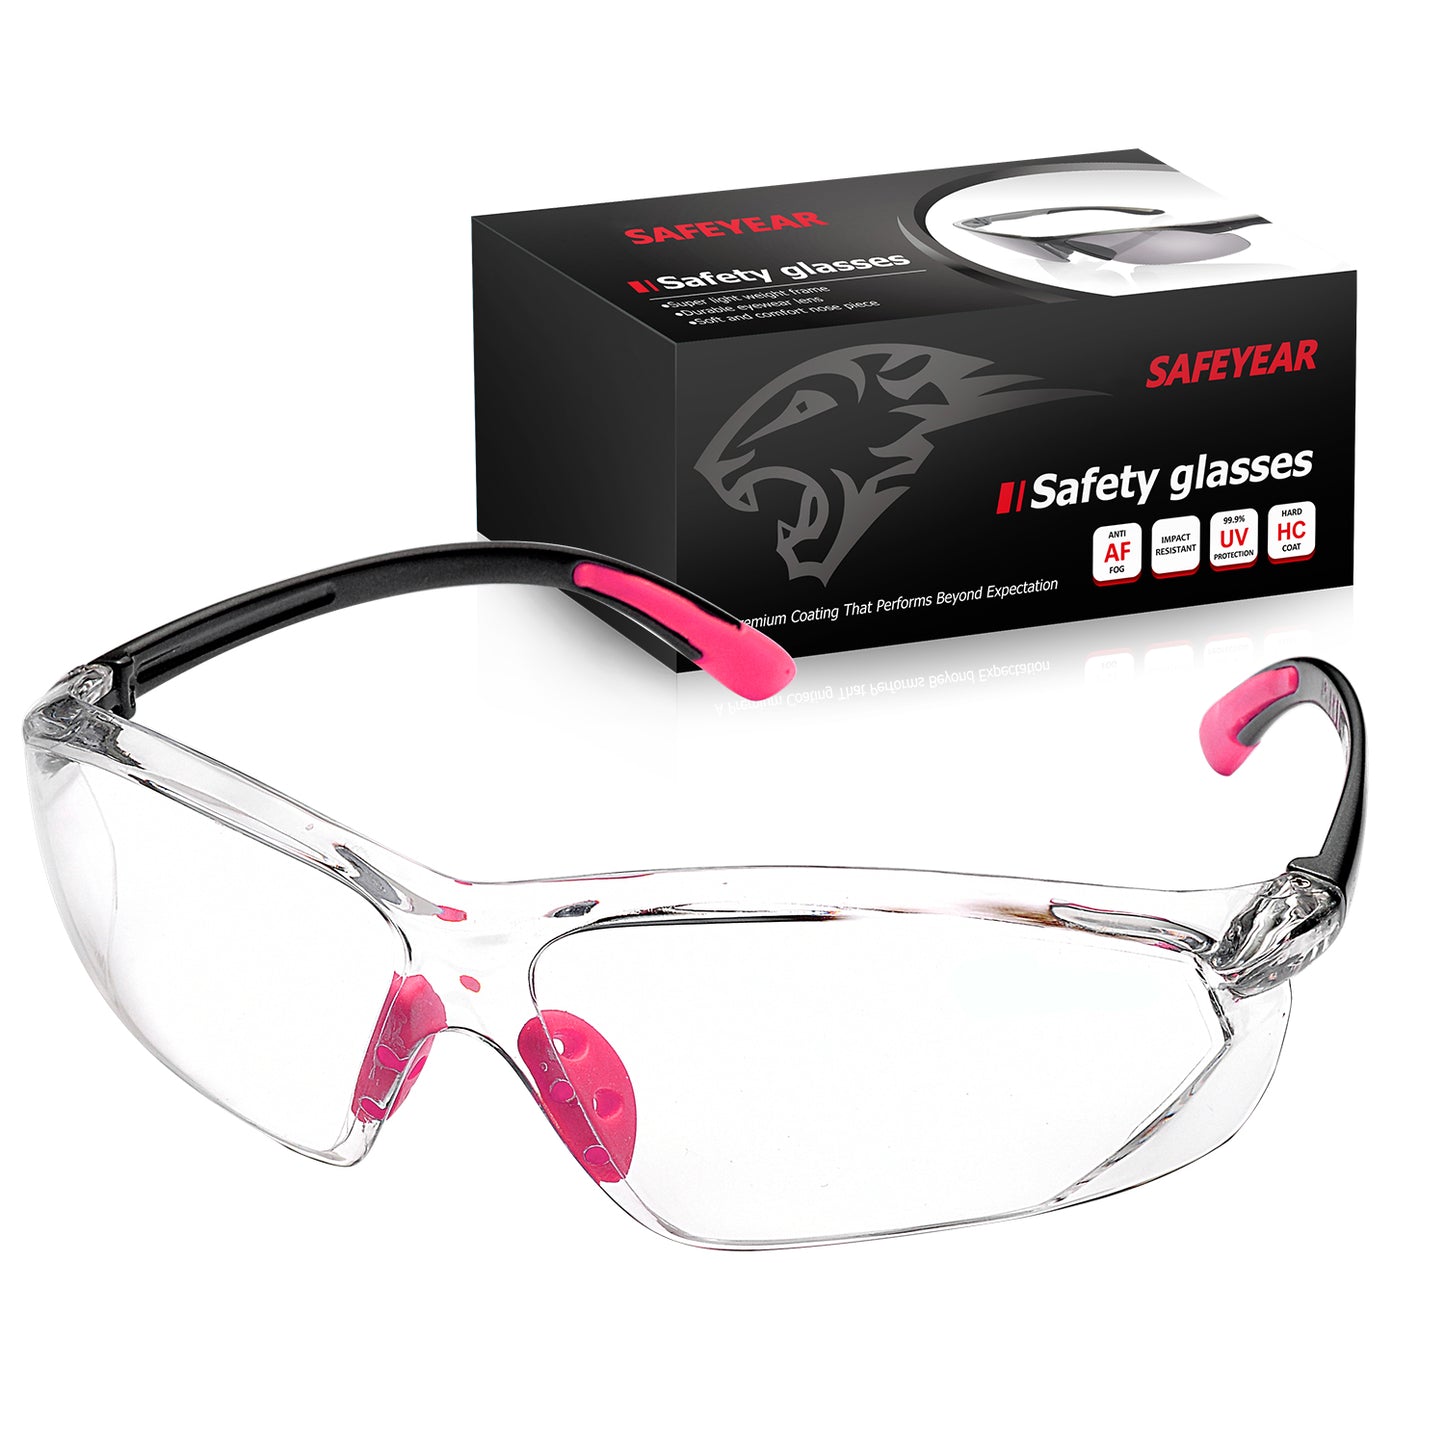 SAFEYEAR Women Safety Glasses Anti Fog Lens,HD Clear Scratch Resistant Work Glasses with Adjustable Straps for Lady, No-Slip Grips,VU Protection for DIY, Lab, Welding, Grinding,Chemistry(Pink)